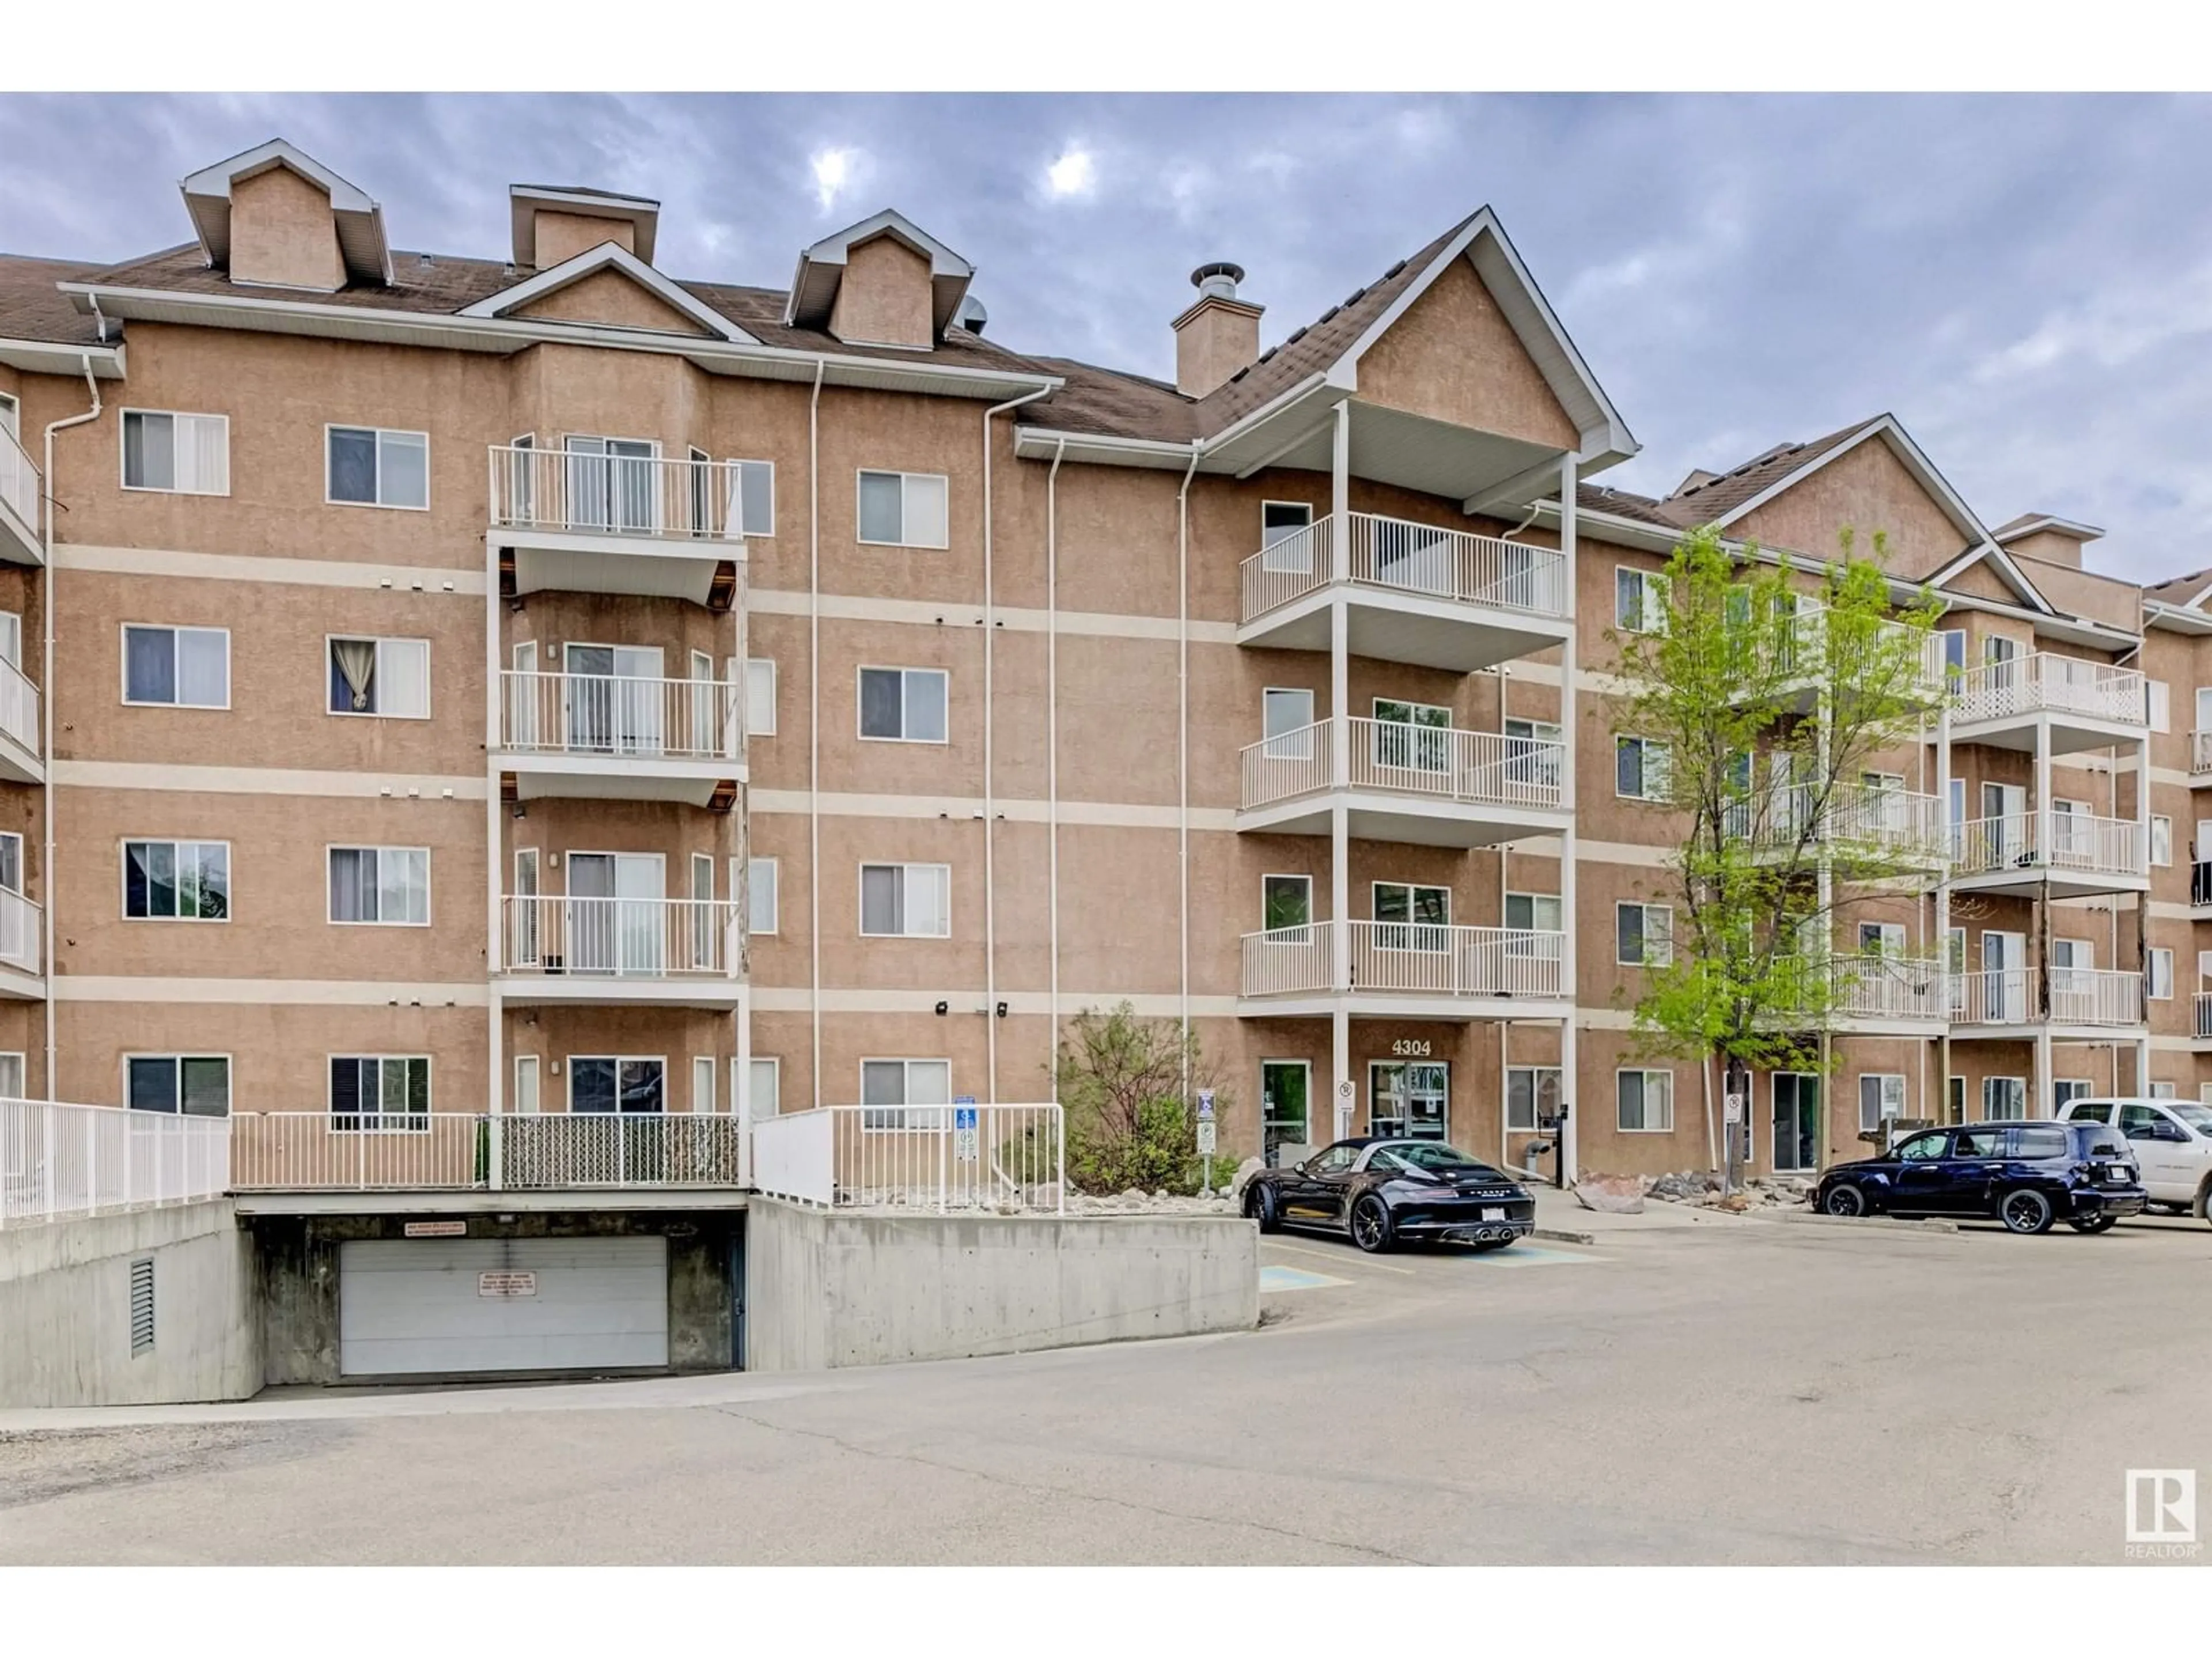 A pic from exterior of the house or condo for #111 4304 139 AV NW, Edmonton Alberta T5Y0H6